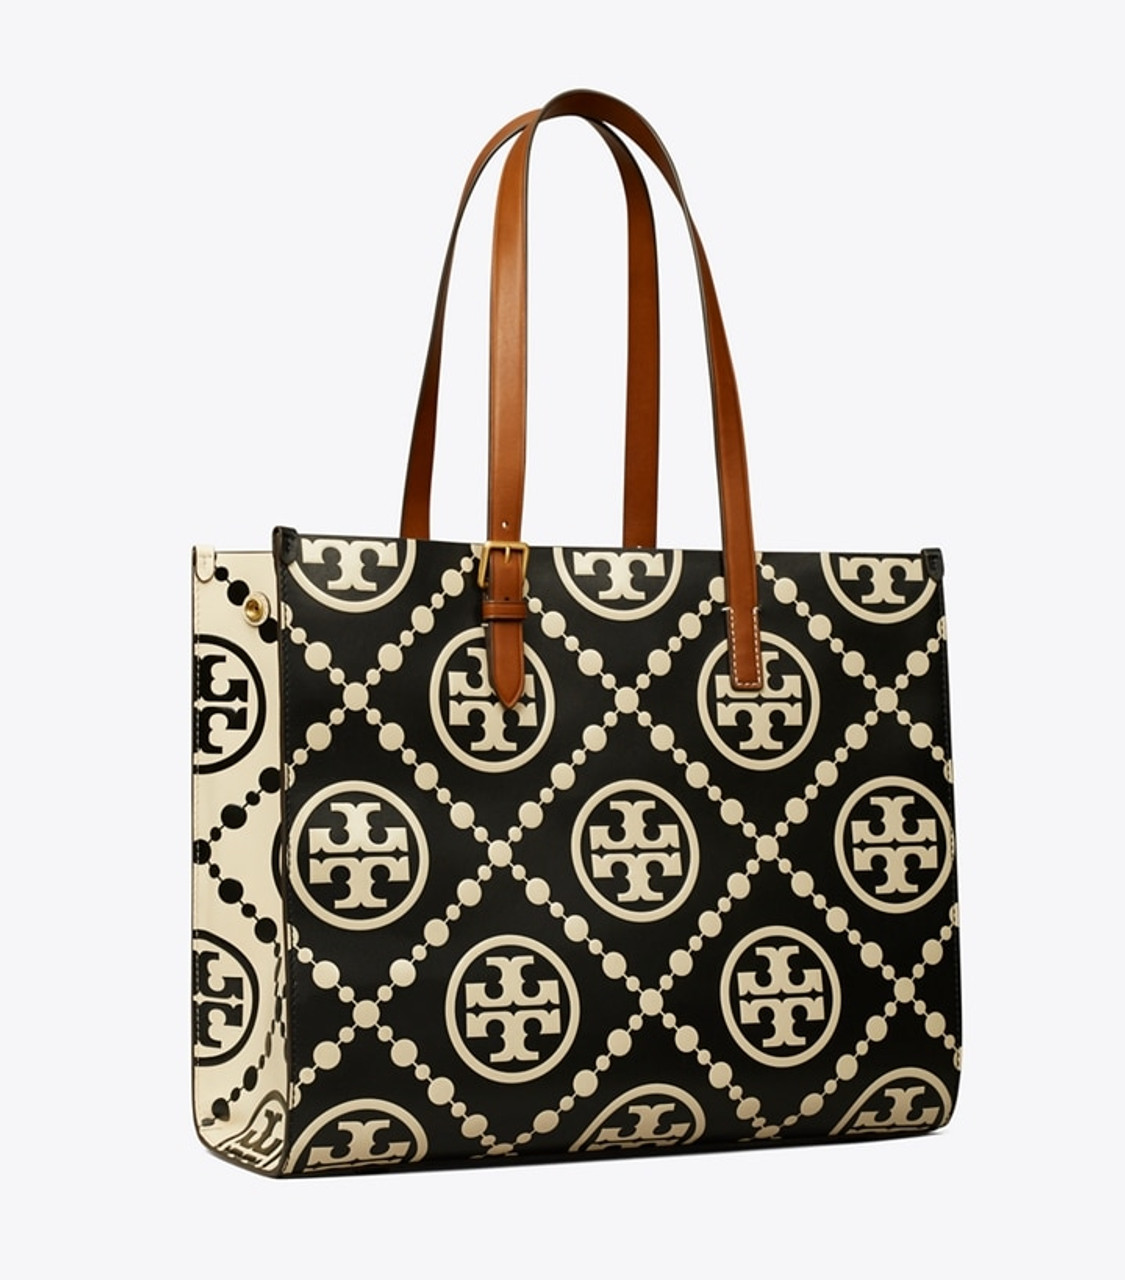 Tory Burch Women's T Monogram Coated Canvas Tote India